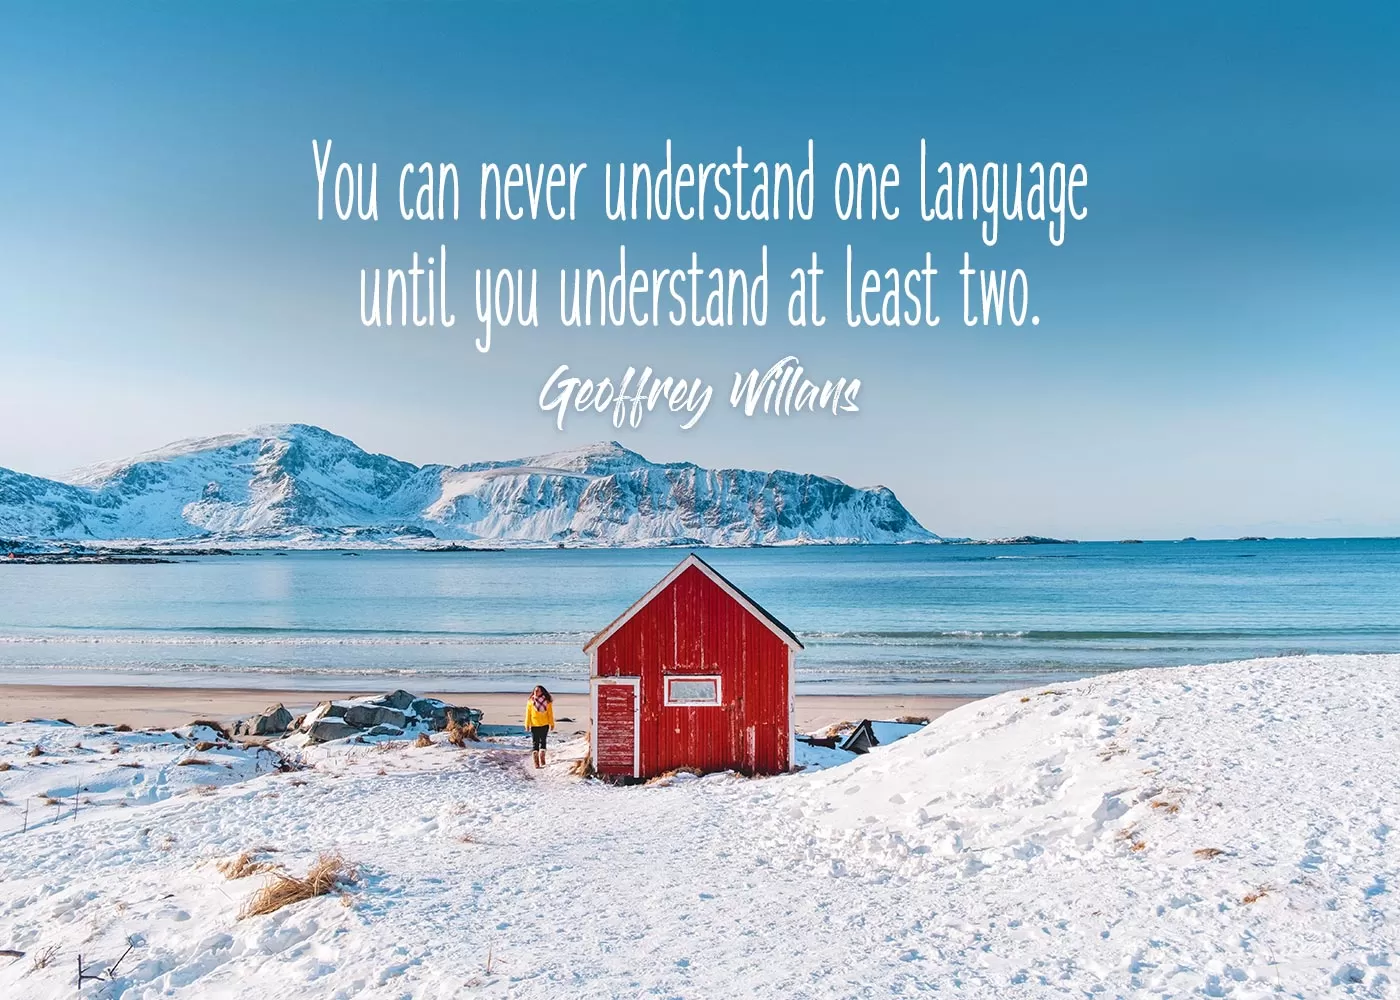 Language Learning Quote: “You can never understand one language until you understand at least two. ‒ Geoffrey Willans